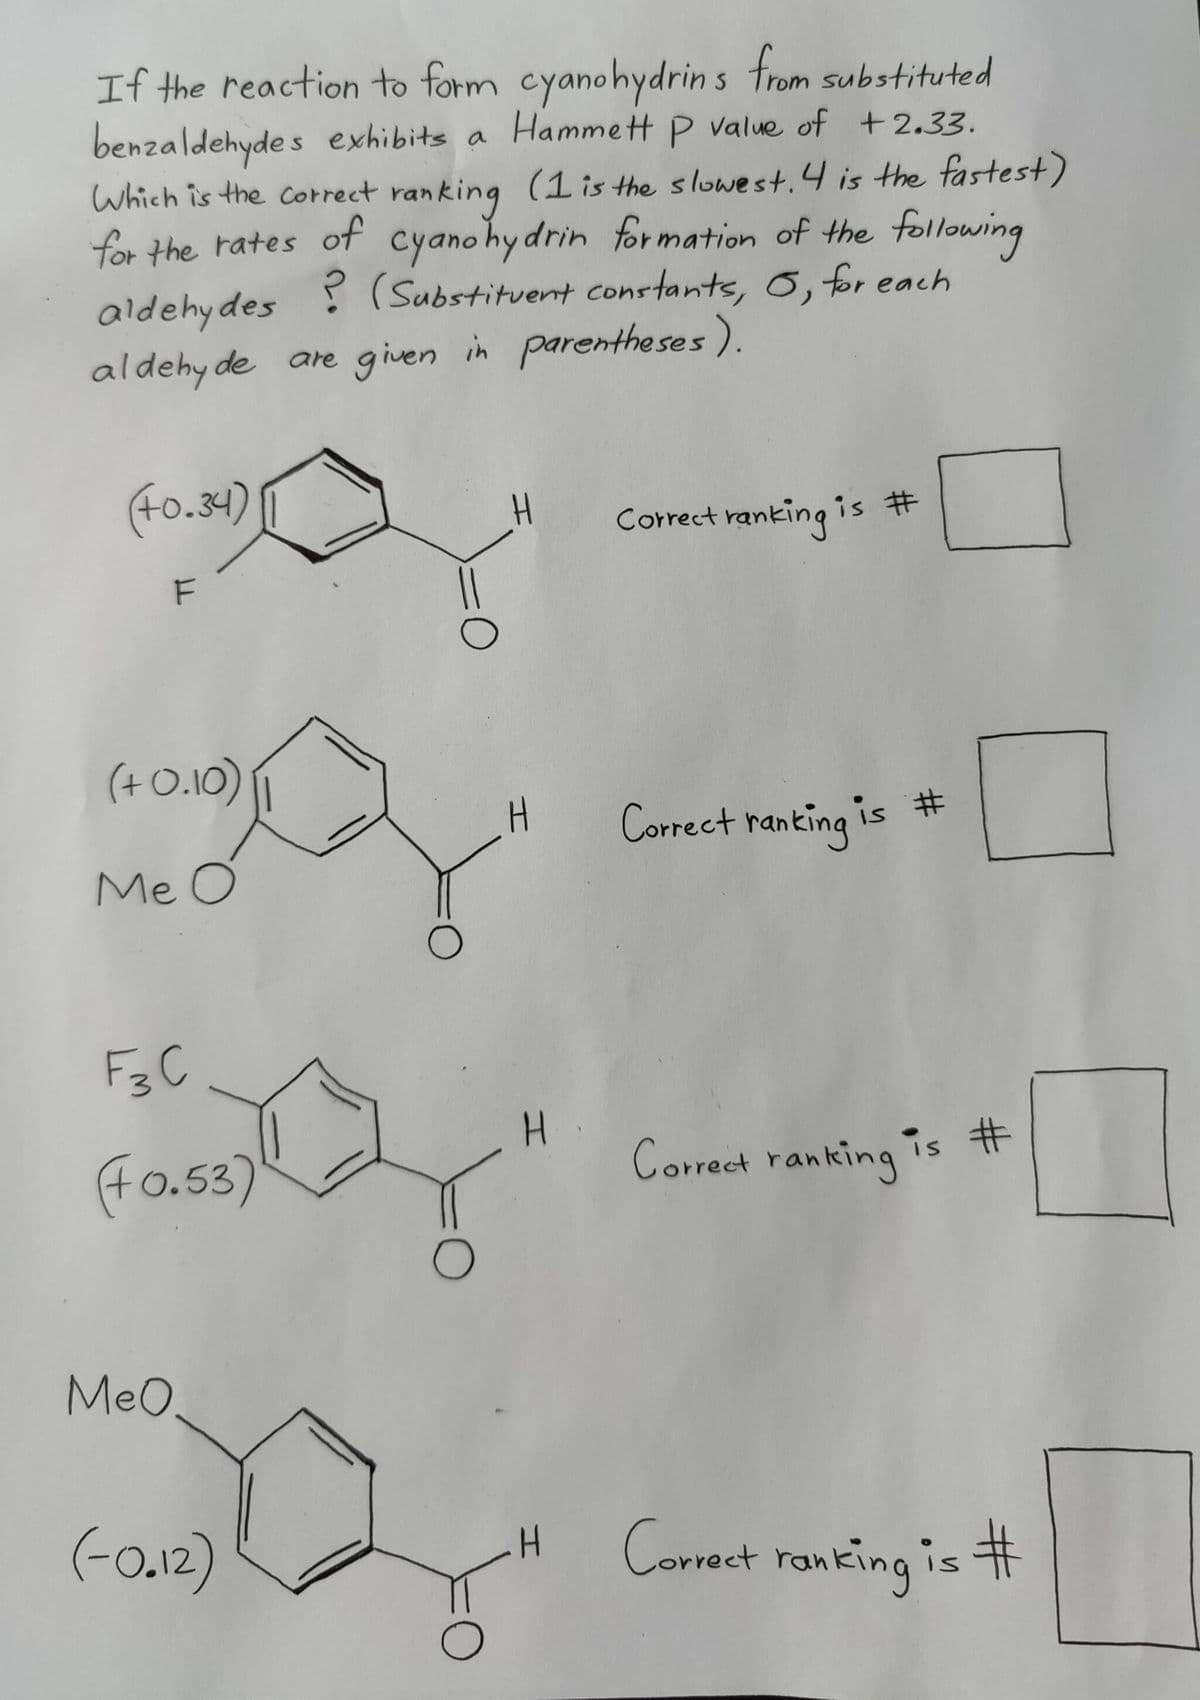 If the reaction to form cyanohydrins from substituted
benzaldehydes exhibits a Hammett P value of +2.33.
Which is the correct ranking (1 is the slowest. 4 is the fastest)
for the rates of cyanohydrin formation of the following
aldehydes (Substituent constants, 6, for each
aldehyde are given in parentheses).
?
(+0.34)
(4)
F
(+0.10)
Me O
О
Correct ranking i
is #
H
Correct ranking is #
F3C
(+0.53)
H
Correct ranking is #
О
MeO.
(-0.12)
H
Correct ranking is #